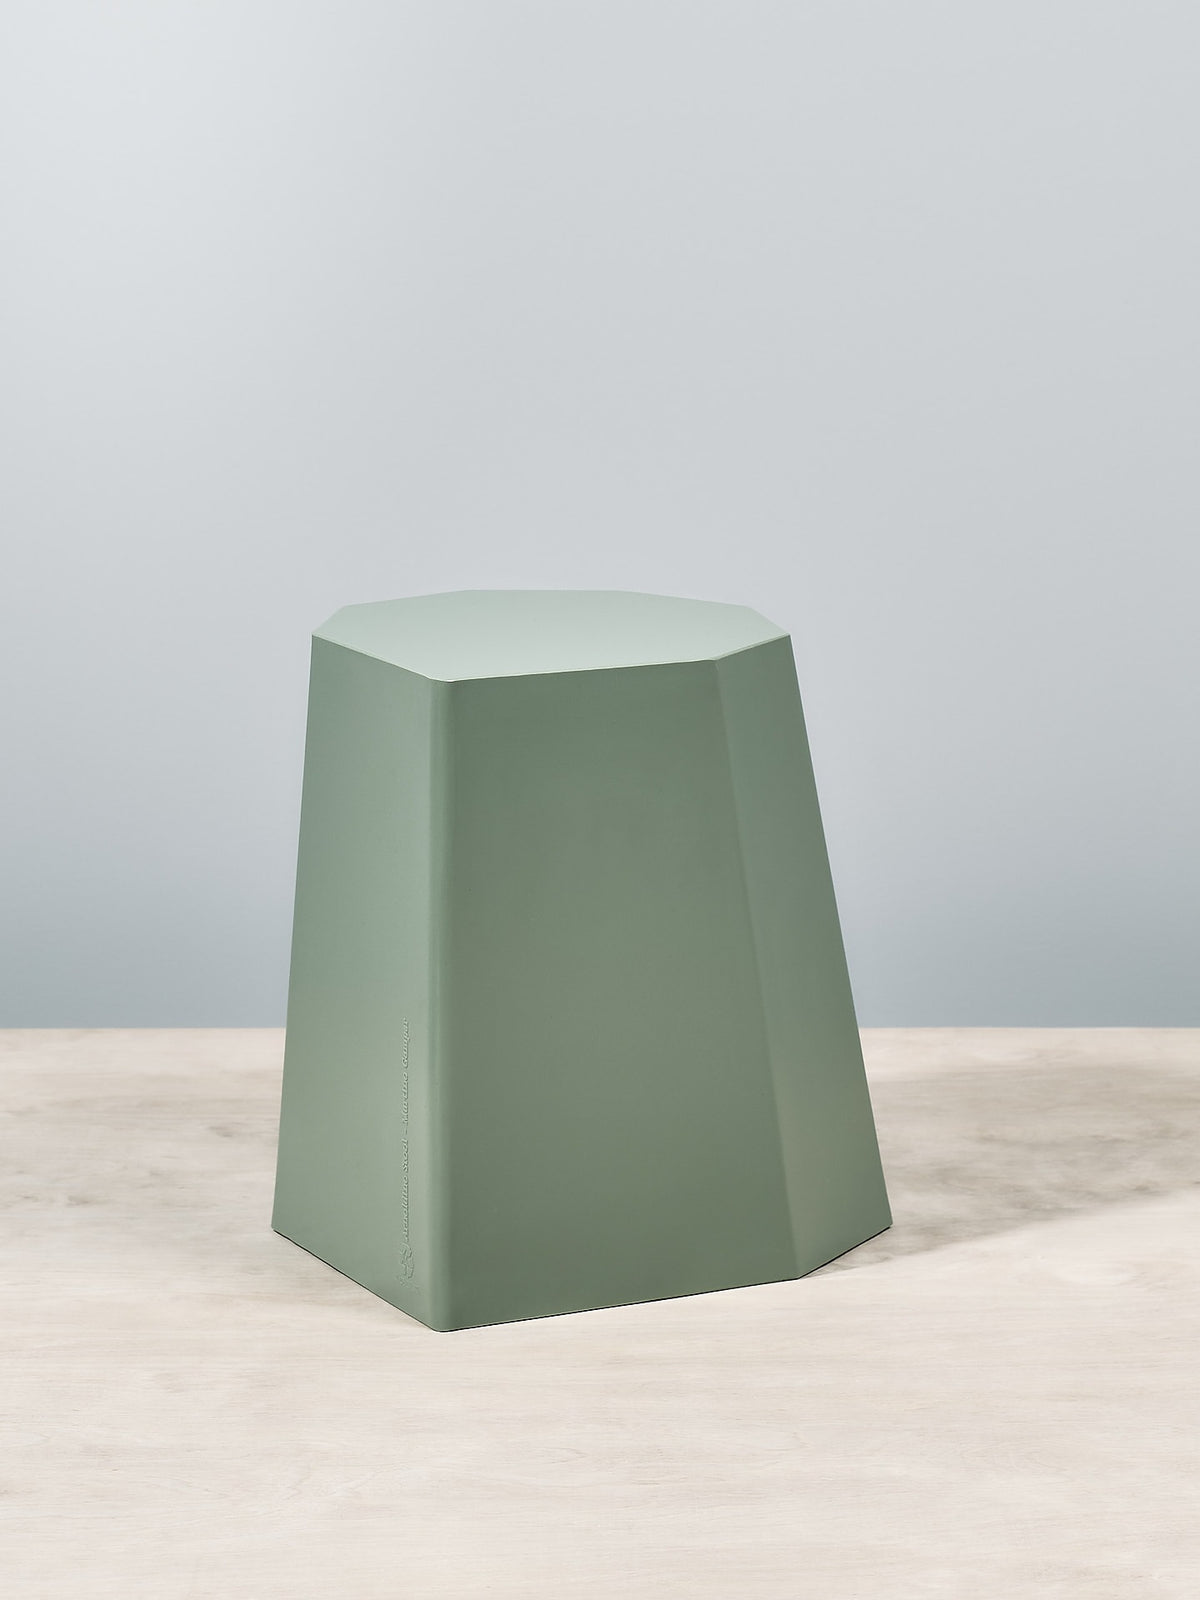 An Arnoldino Stool – Sage by Martino Gamper sitting on top of a table.